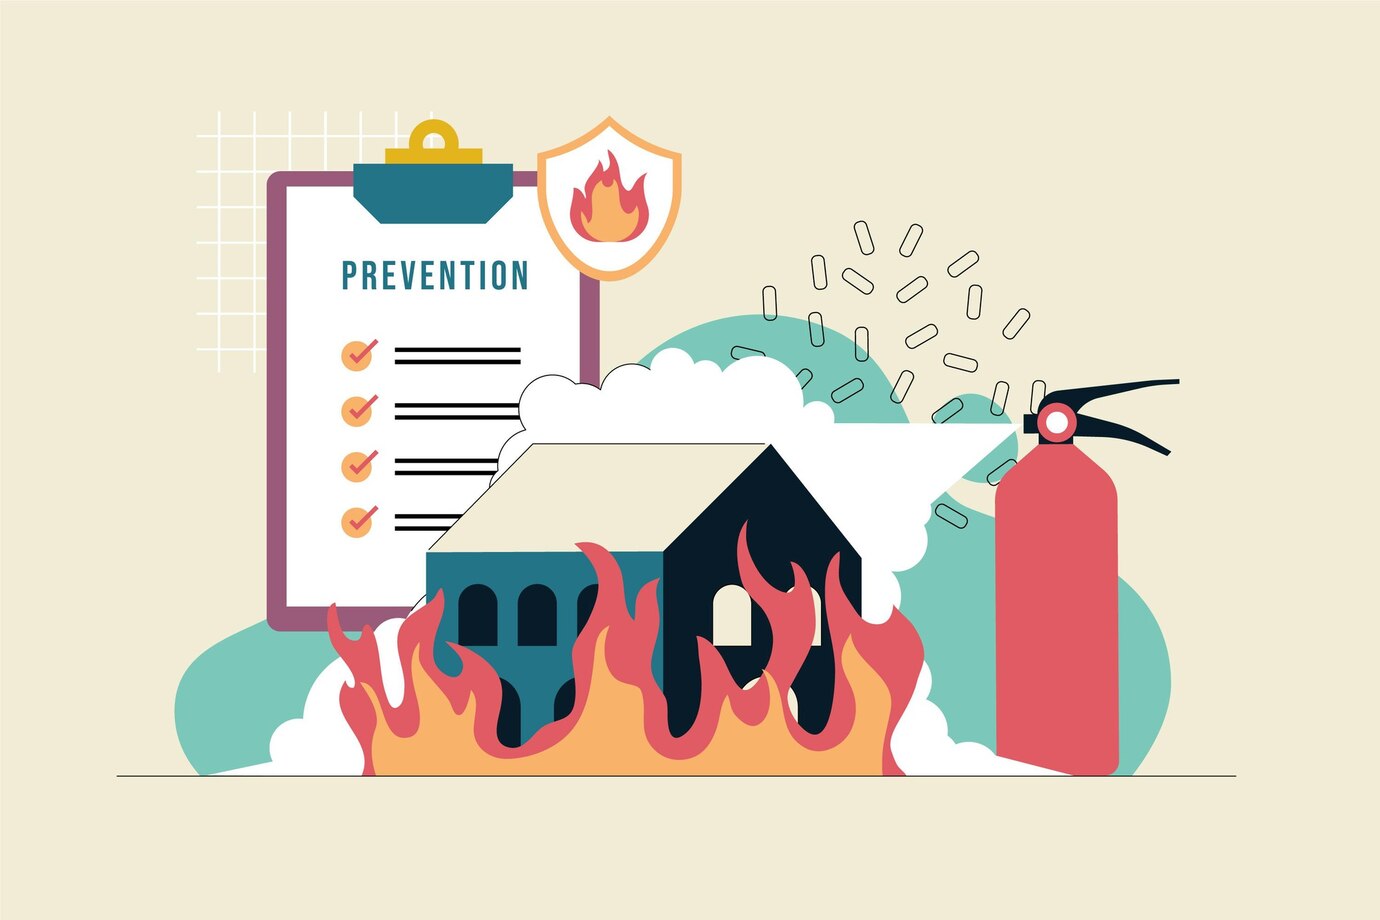 Why is March the Philippines' Fire Prevention Month?